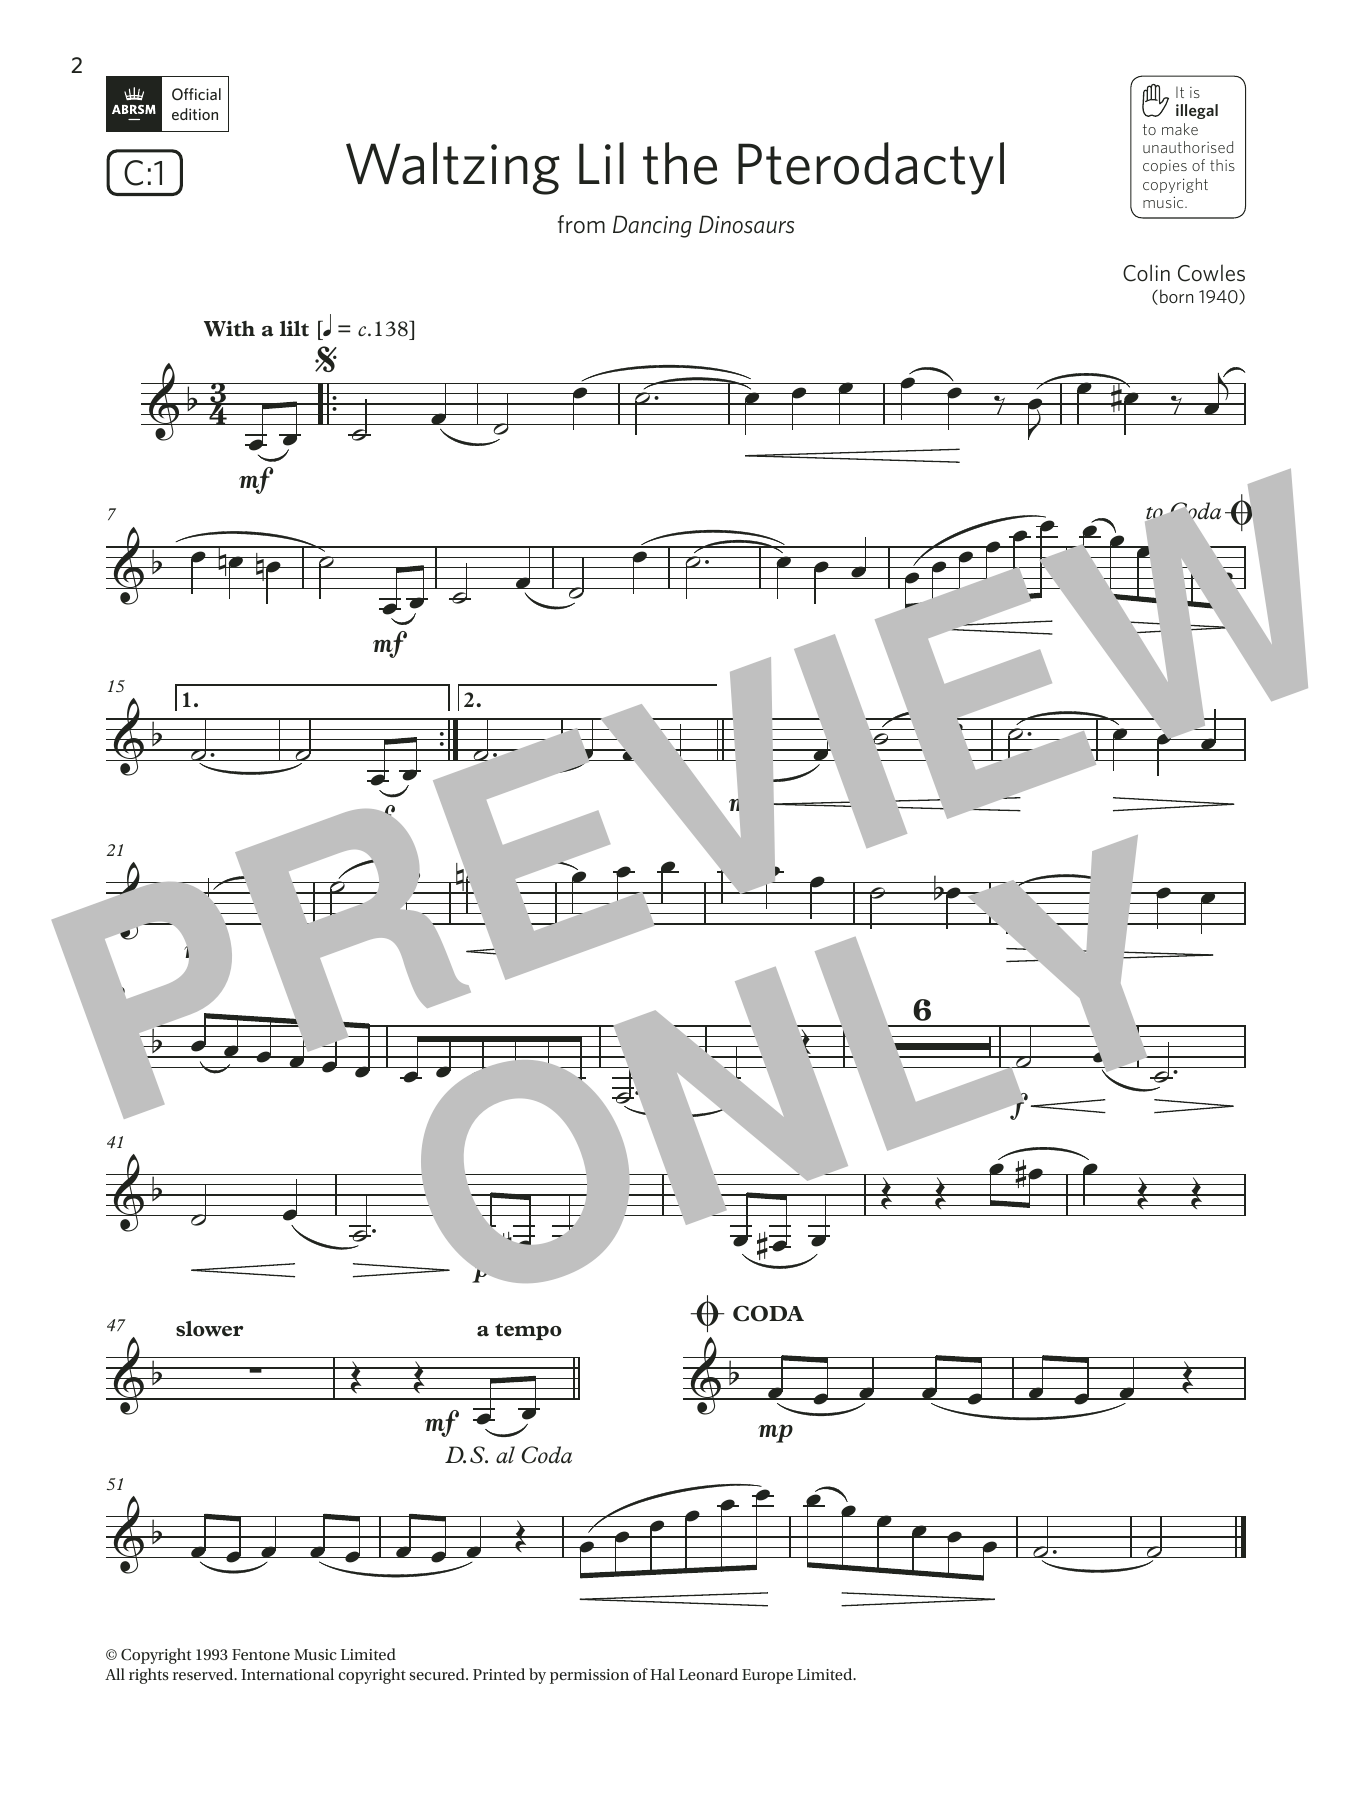 Download Colin Cowles Waltzing Lil the Pterodactyl (Grade 3 L Sheet Music